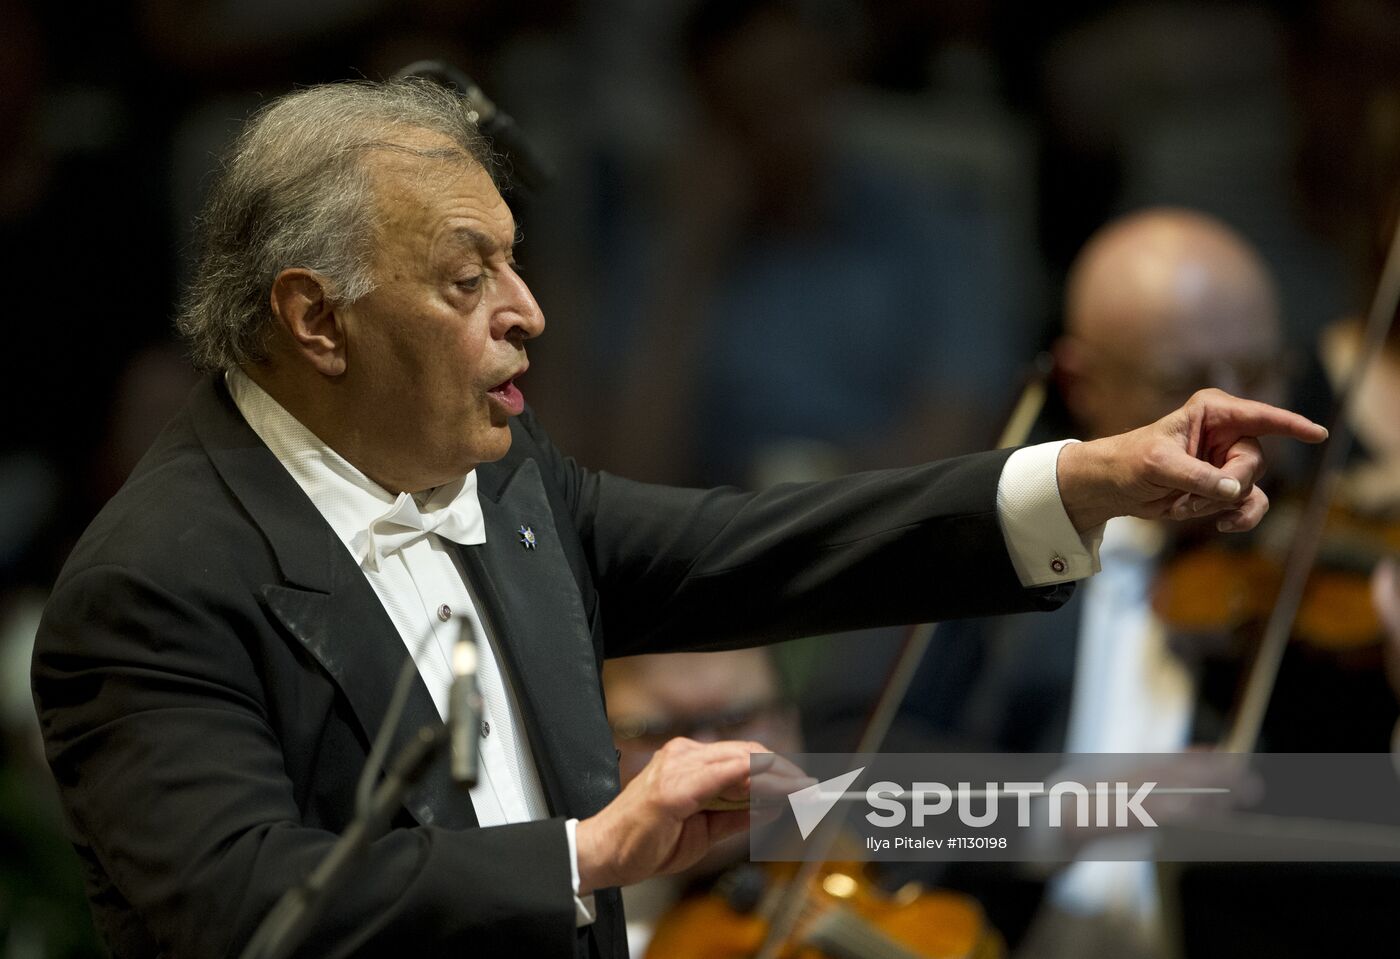 Concert by Israel Philharmonic Orchestra